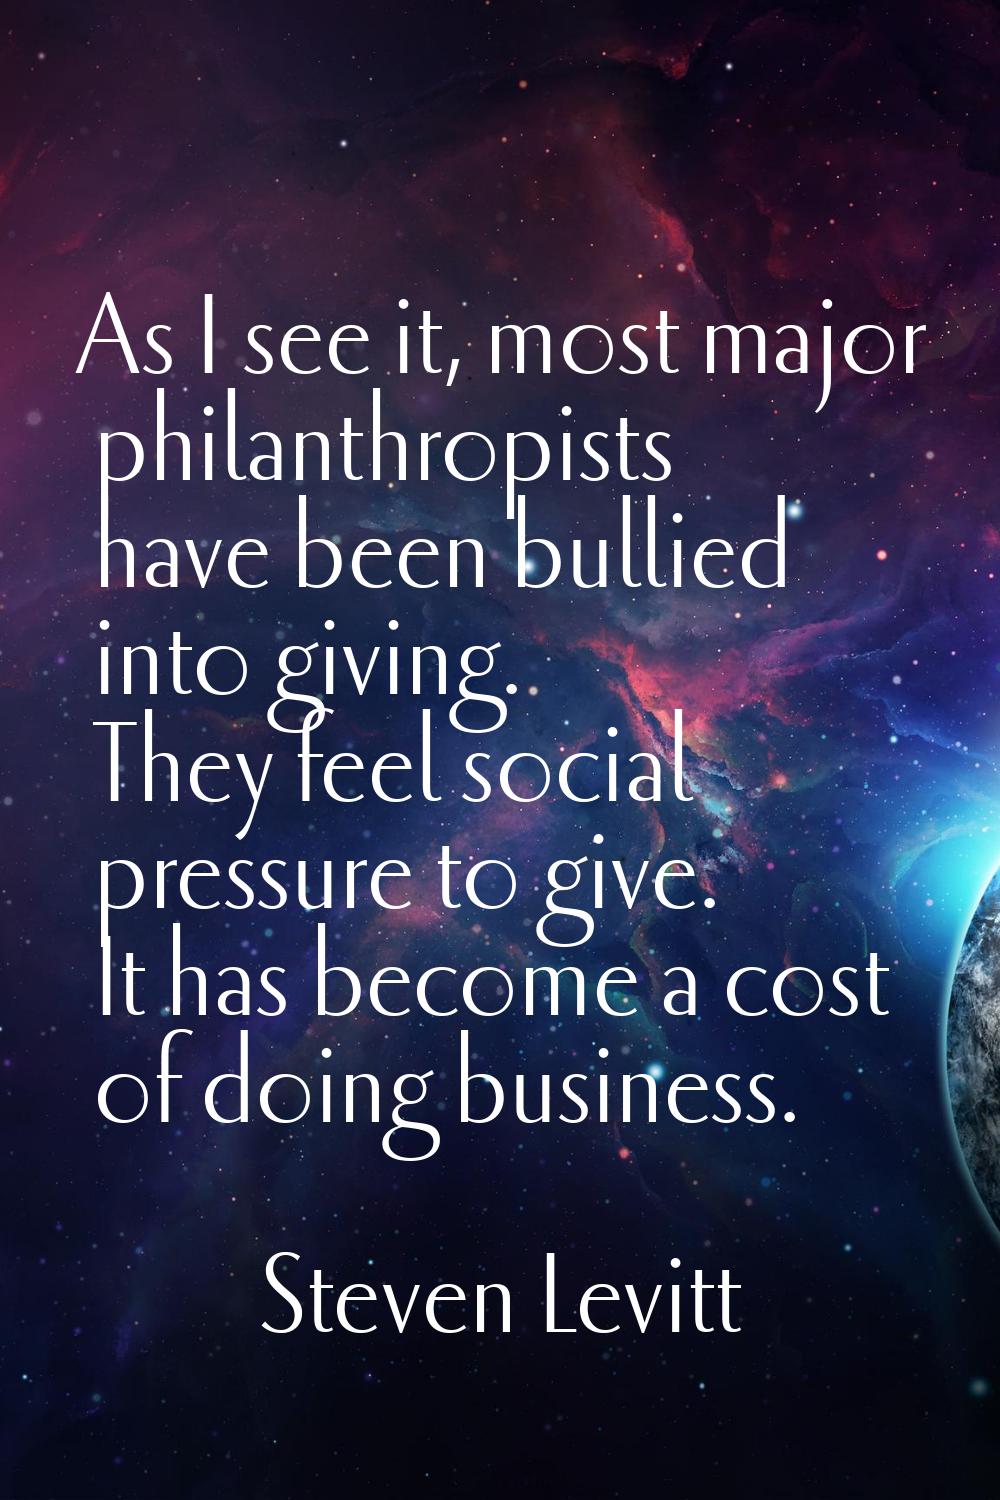 As I see it, most major philanthropists have been bullied into giving. They feel social pressure to